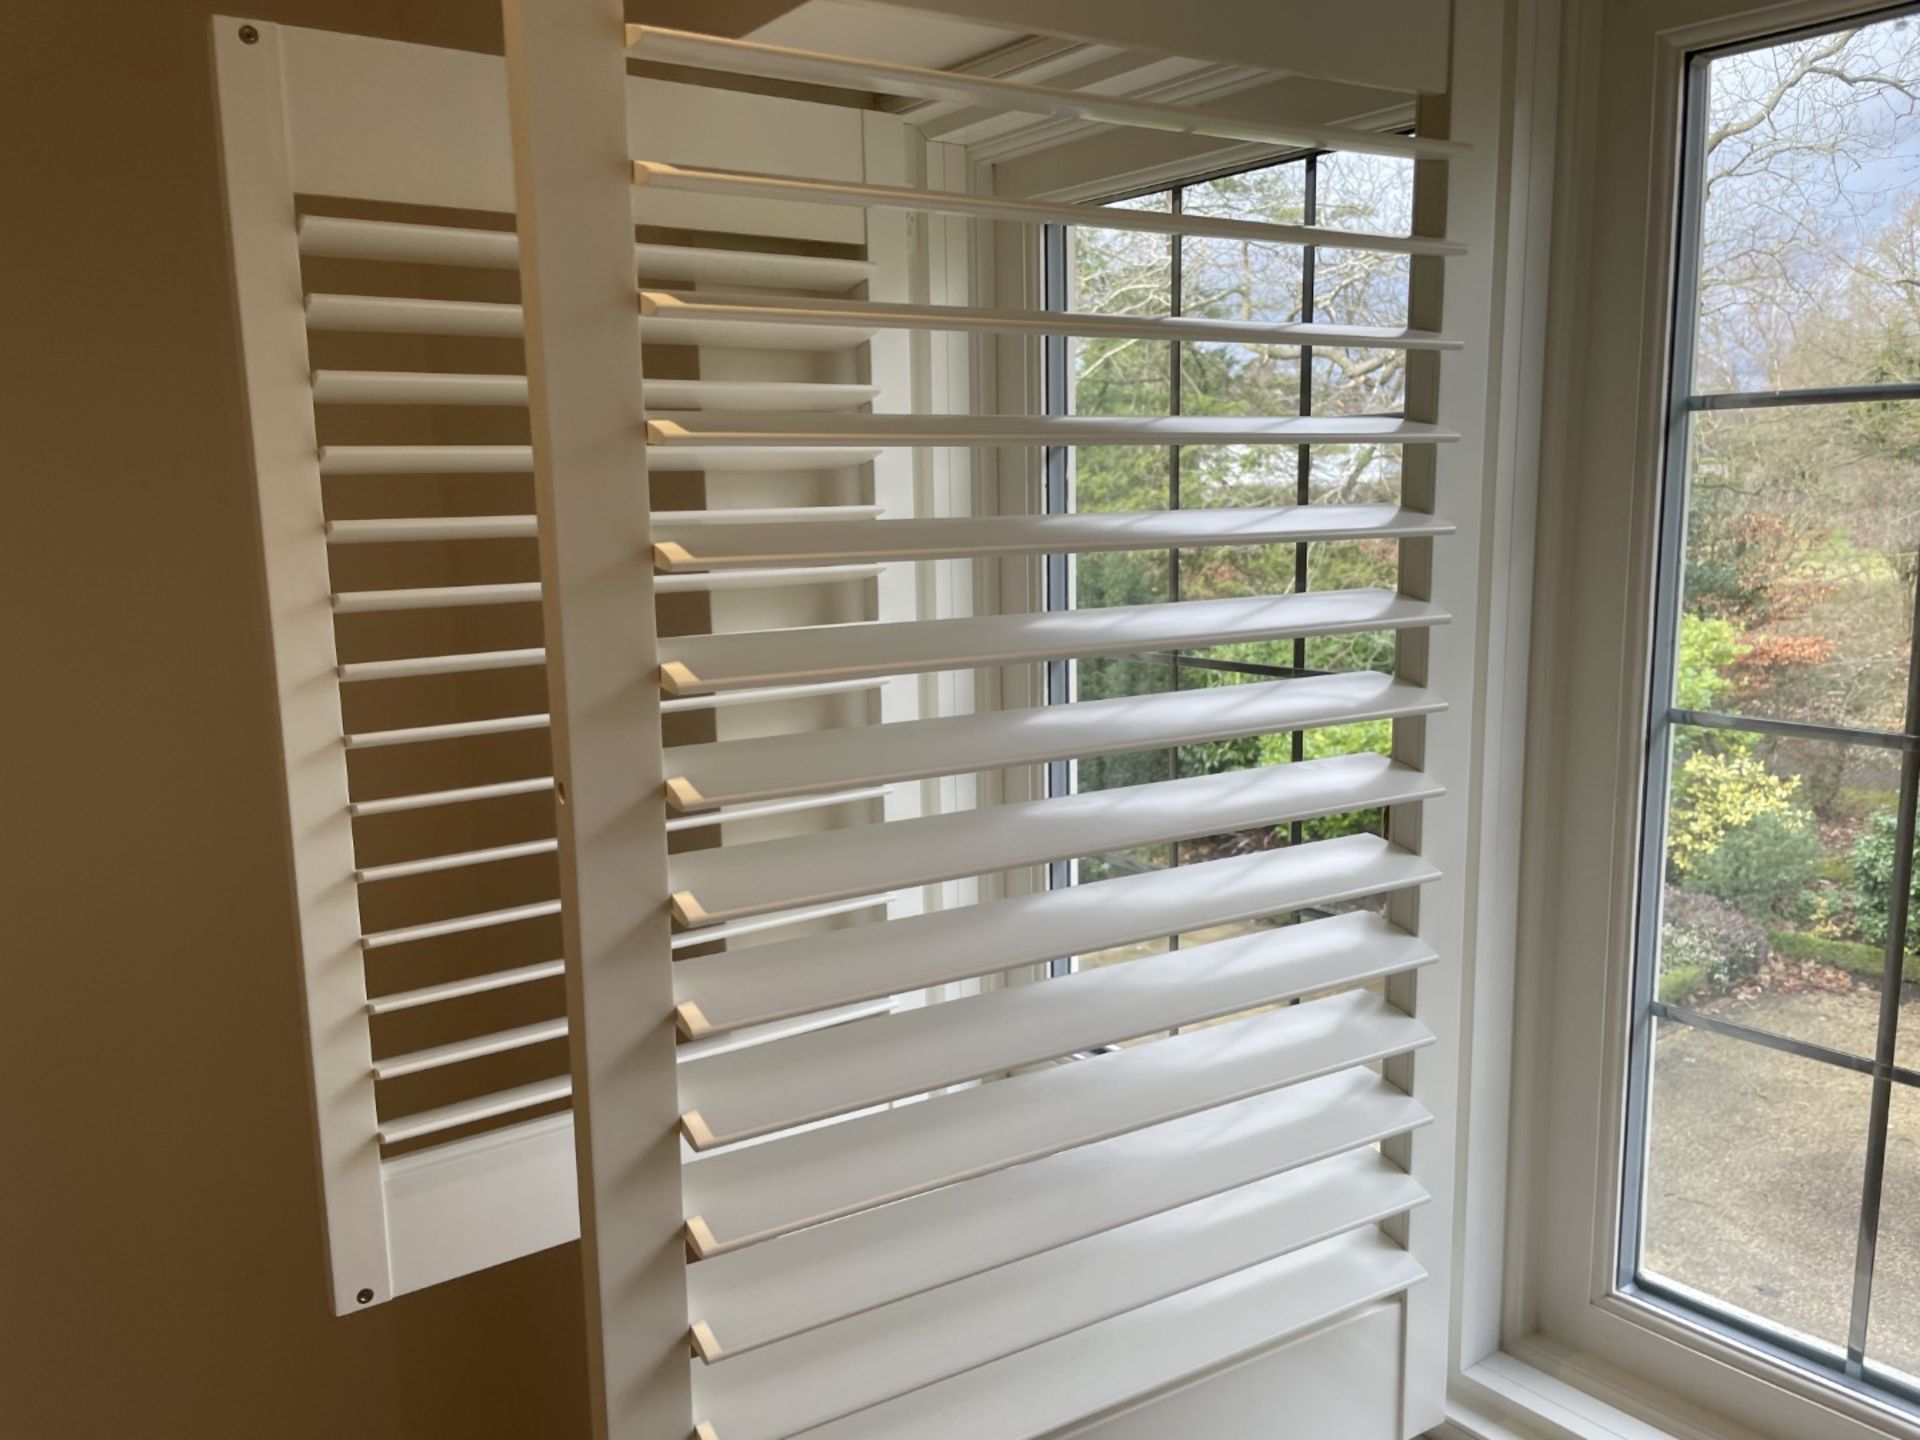 1 x Hardwood Timber Double Glazed Leaded 3-Pane Window Frame fitted with Shutter Blinds - Image 7 of 17